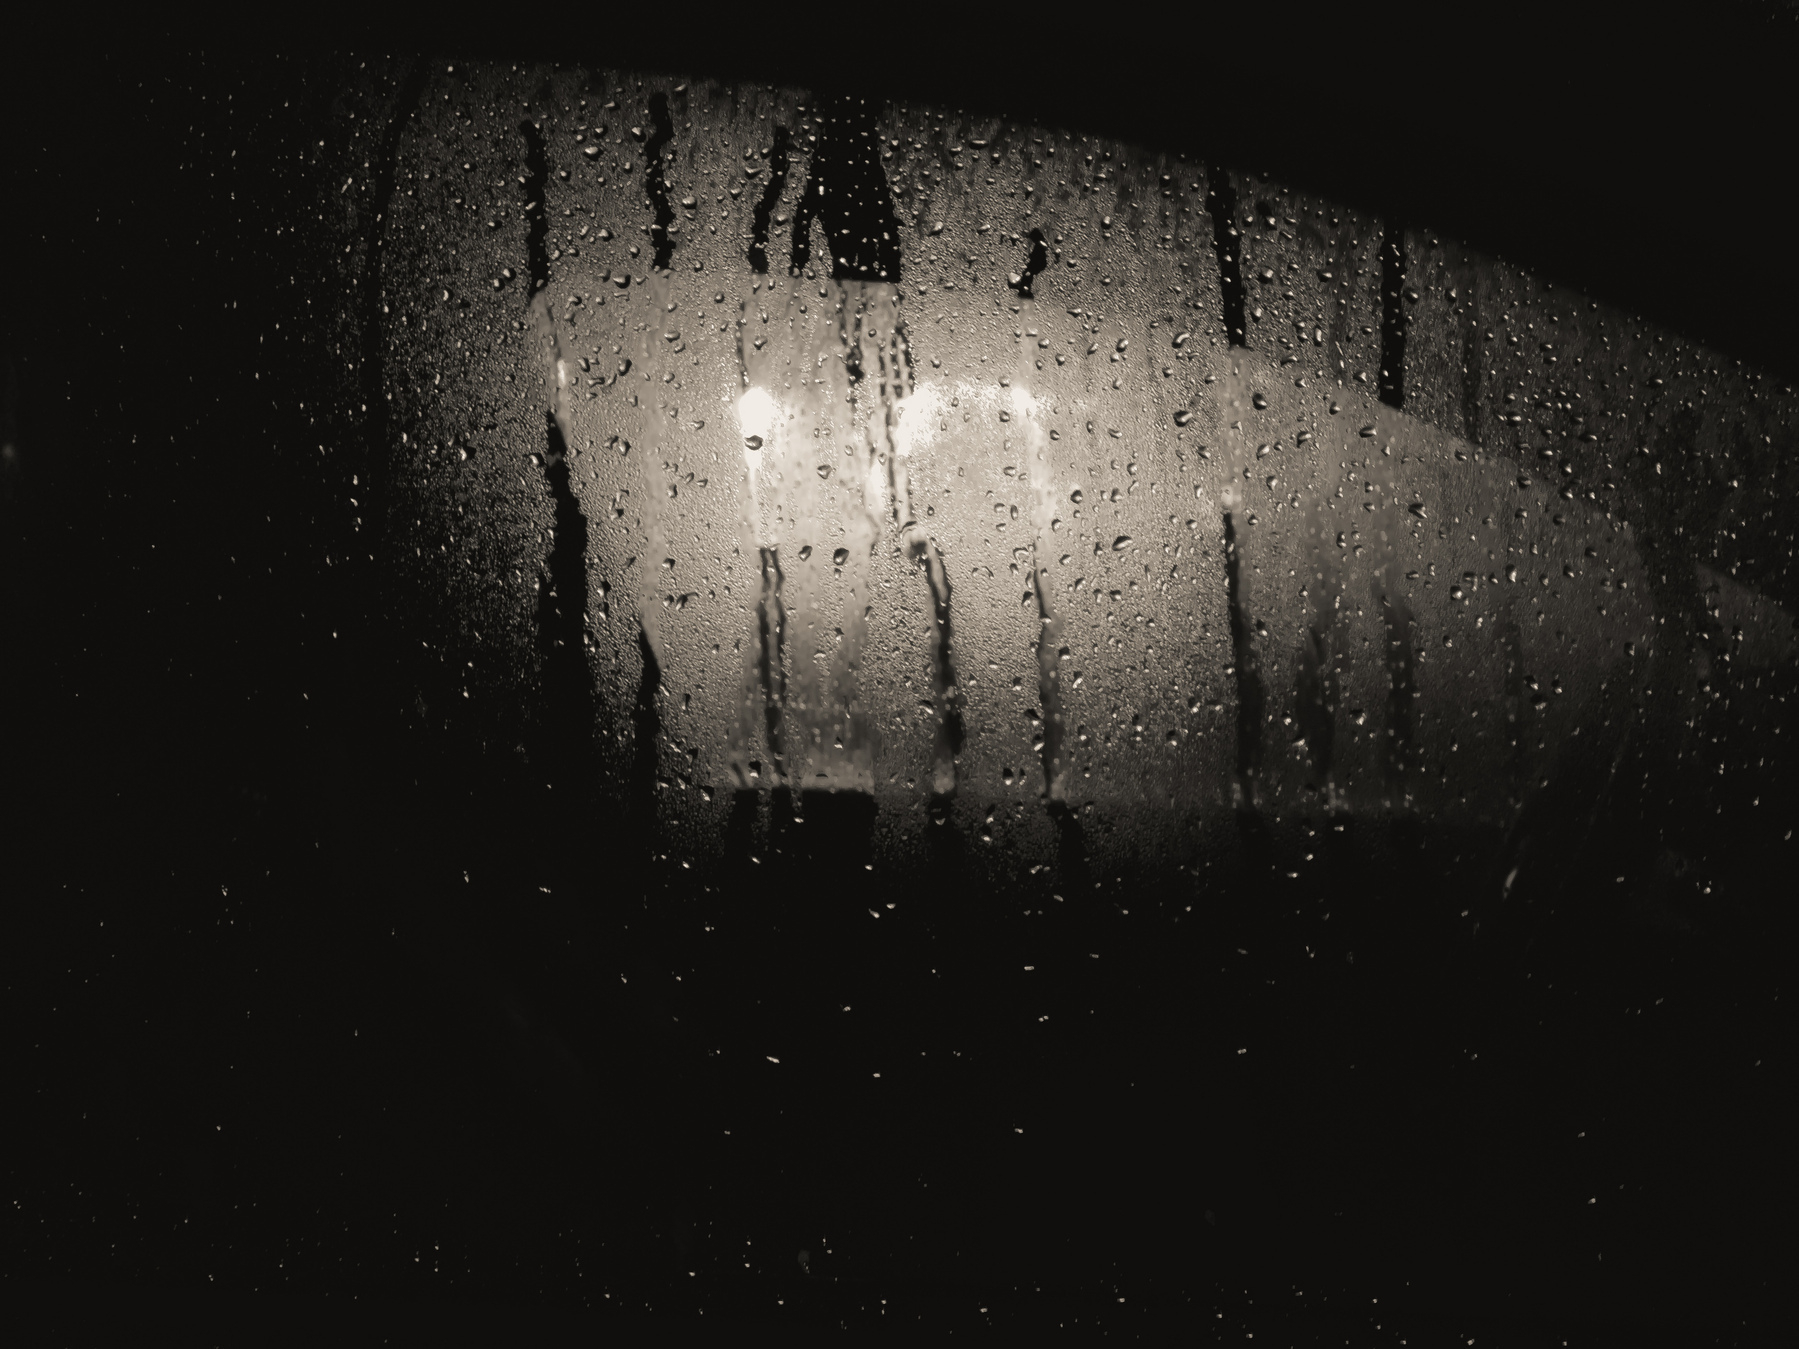 Street lights through car window covered with dew and raindrops.